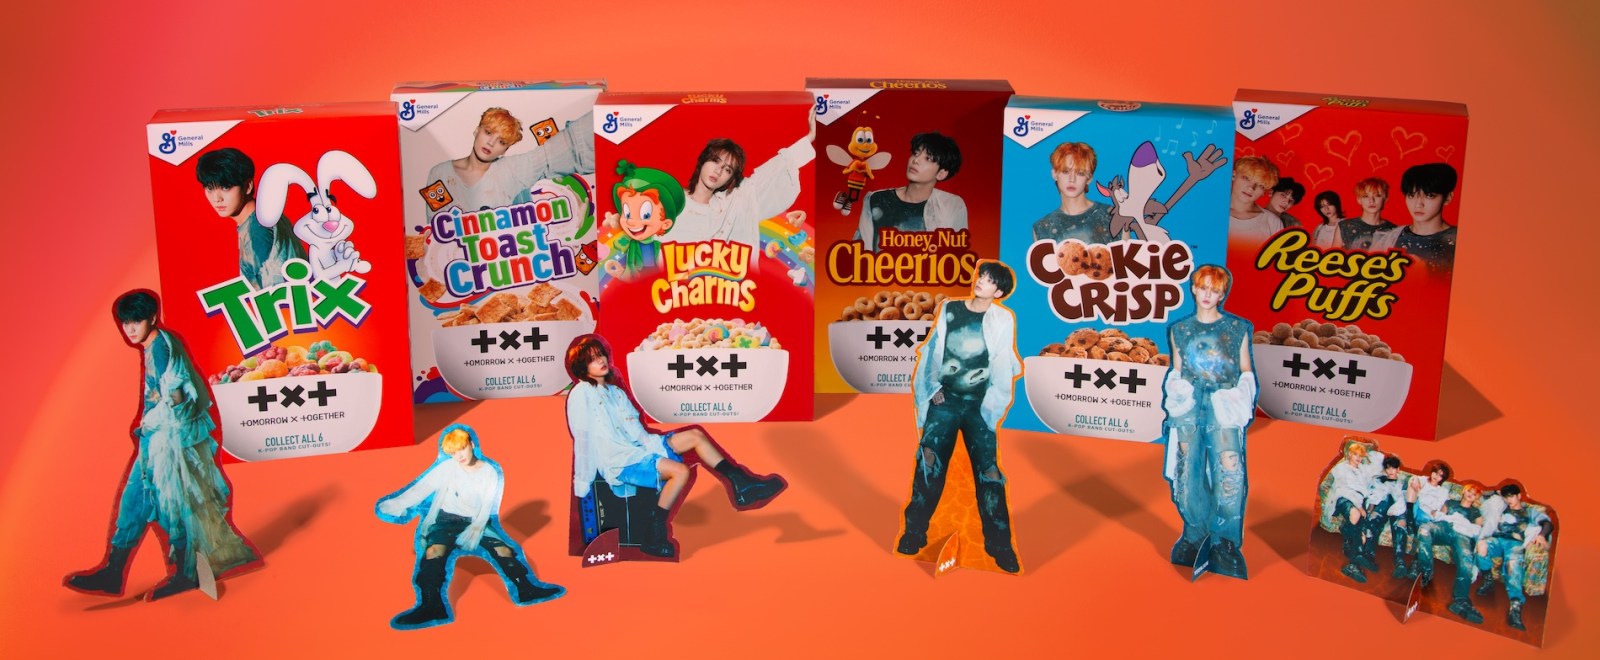 Tomorrow X Together cereal